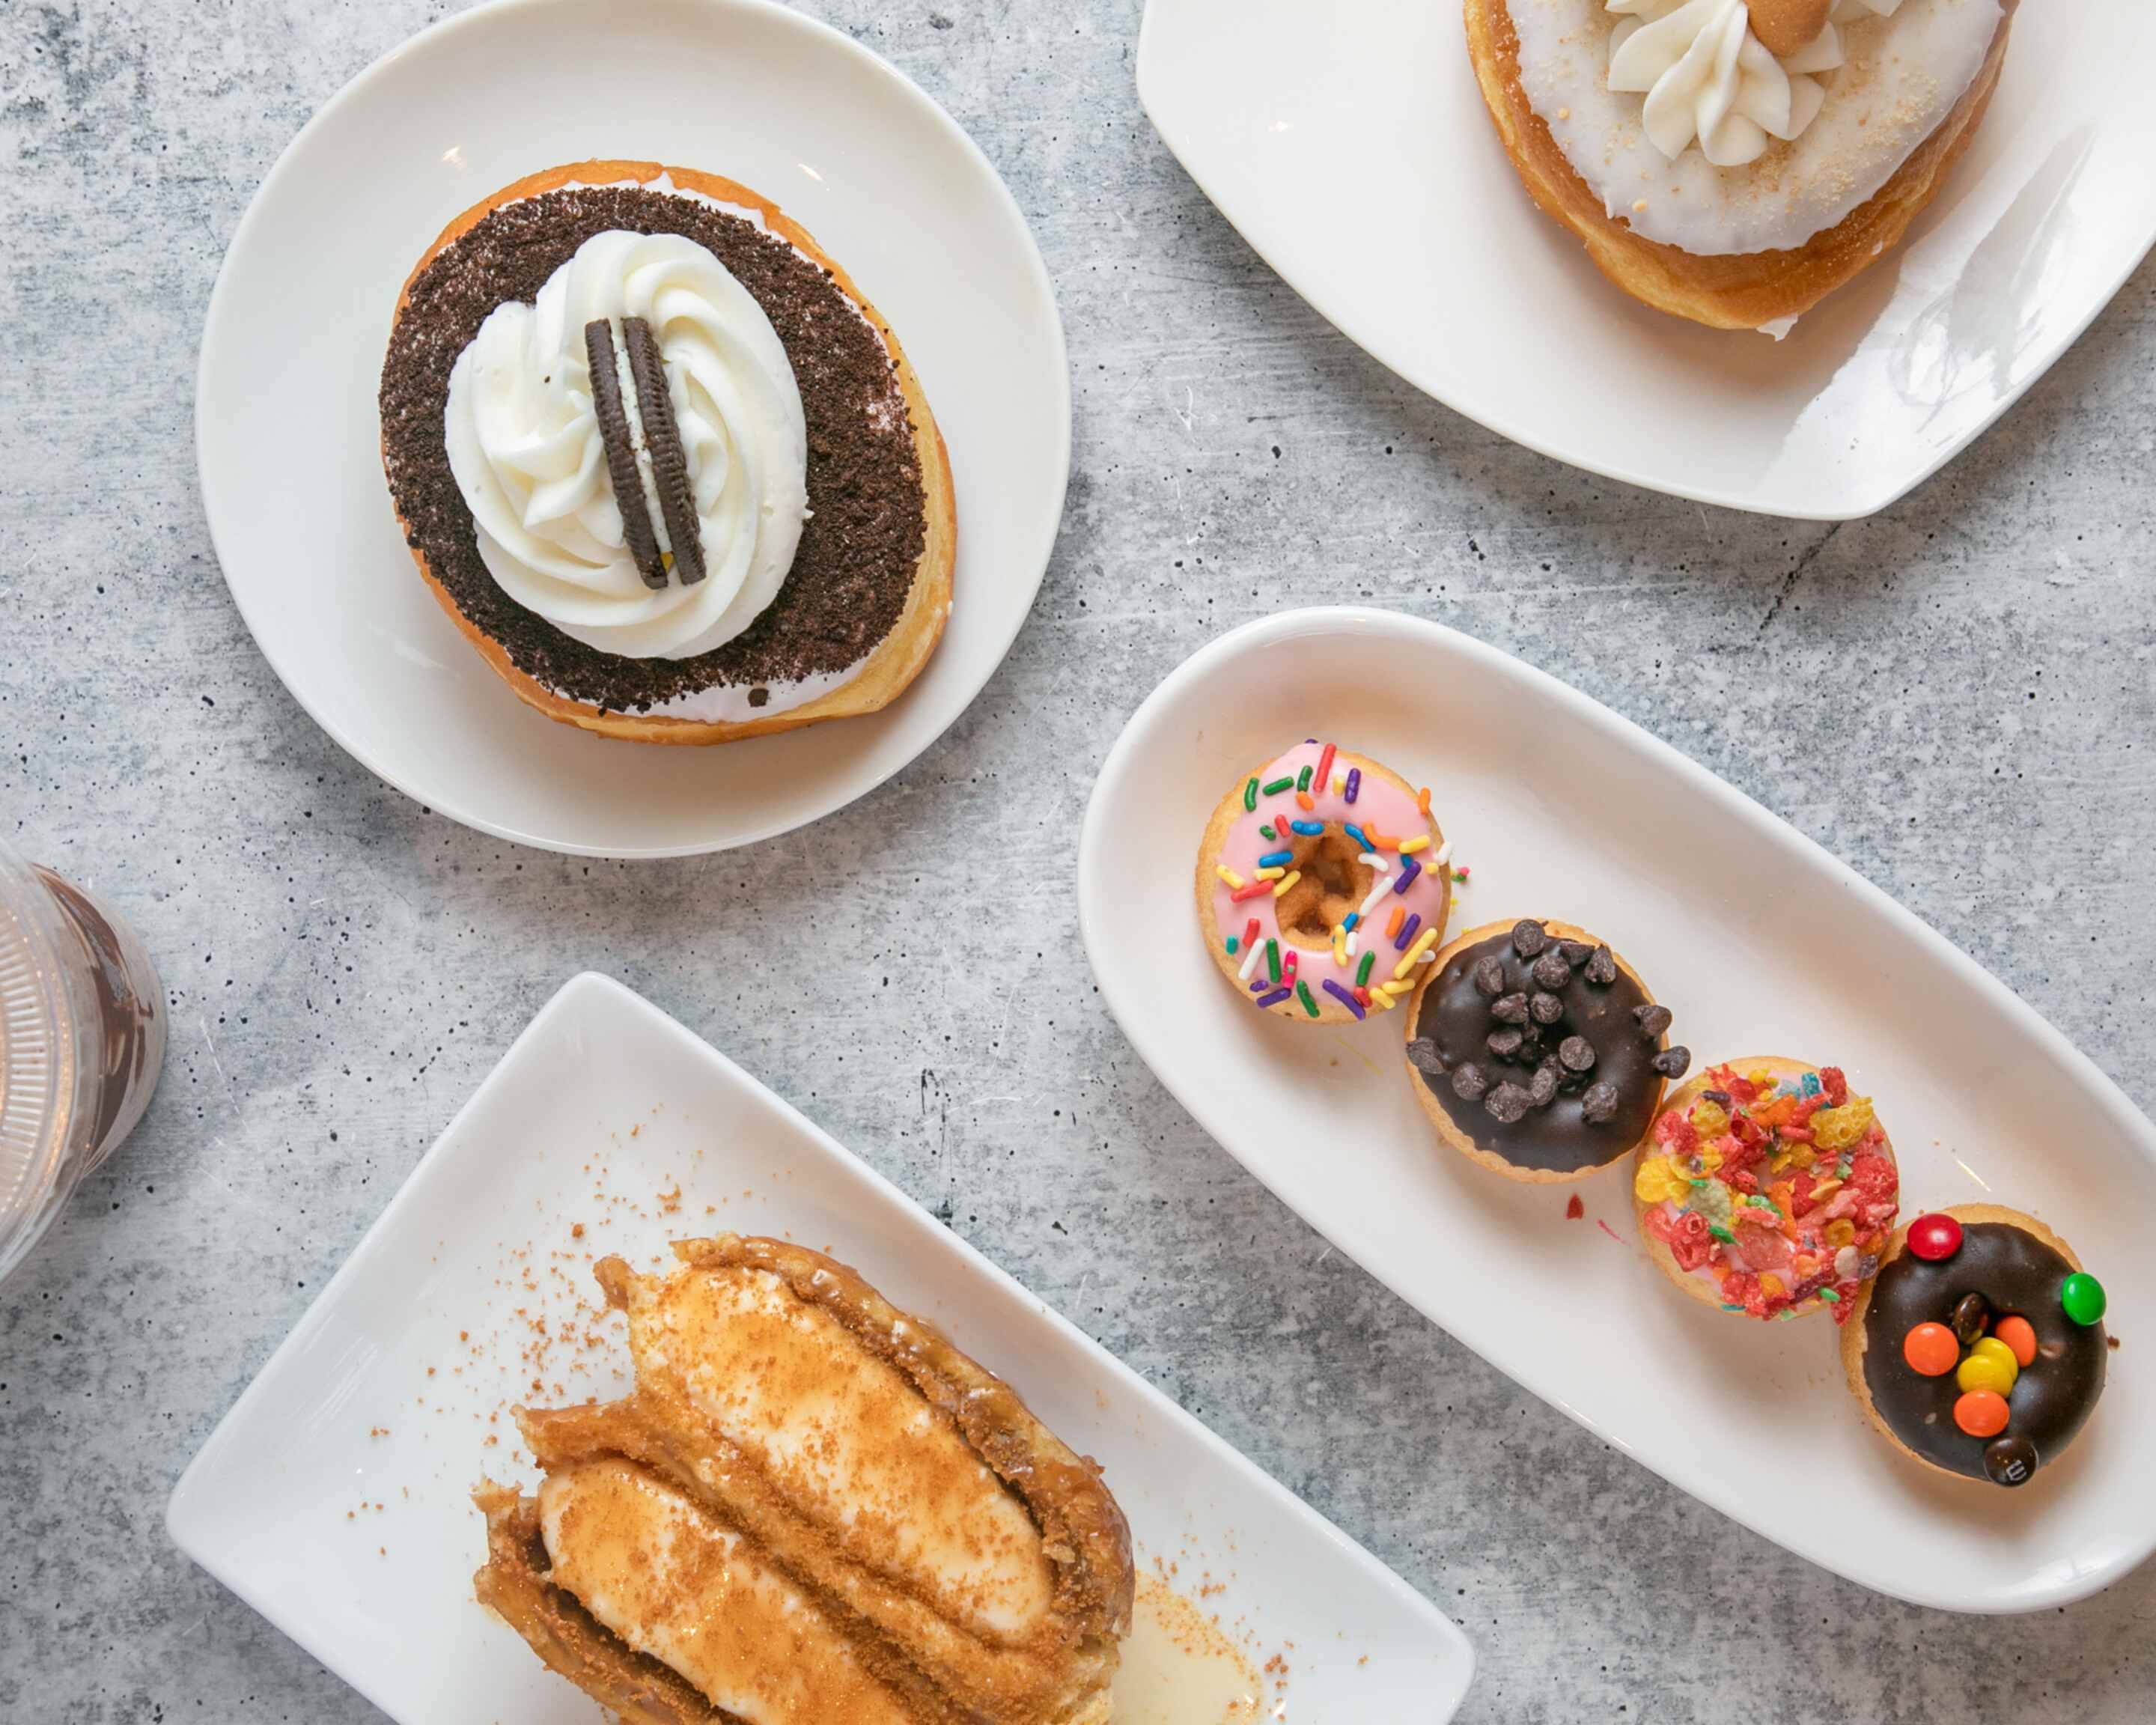 Tim Hortons Has A New Oreo Dream Donut That's Topped With Vanilla Icing And  Cookie Pieces